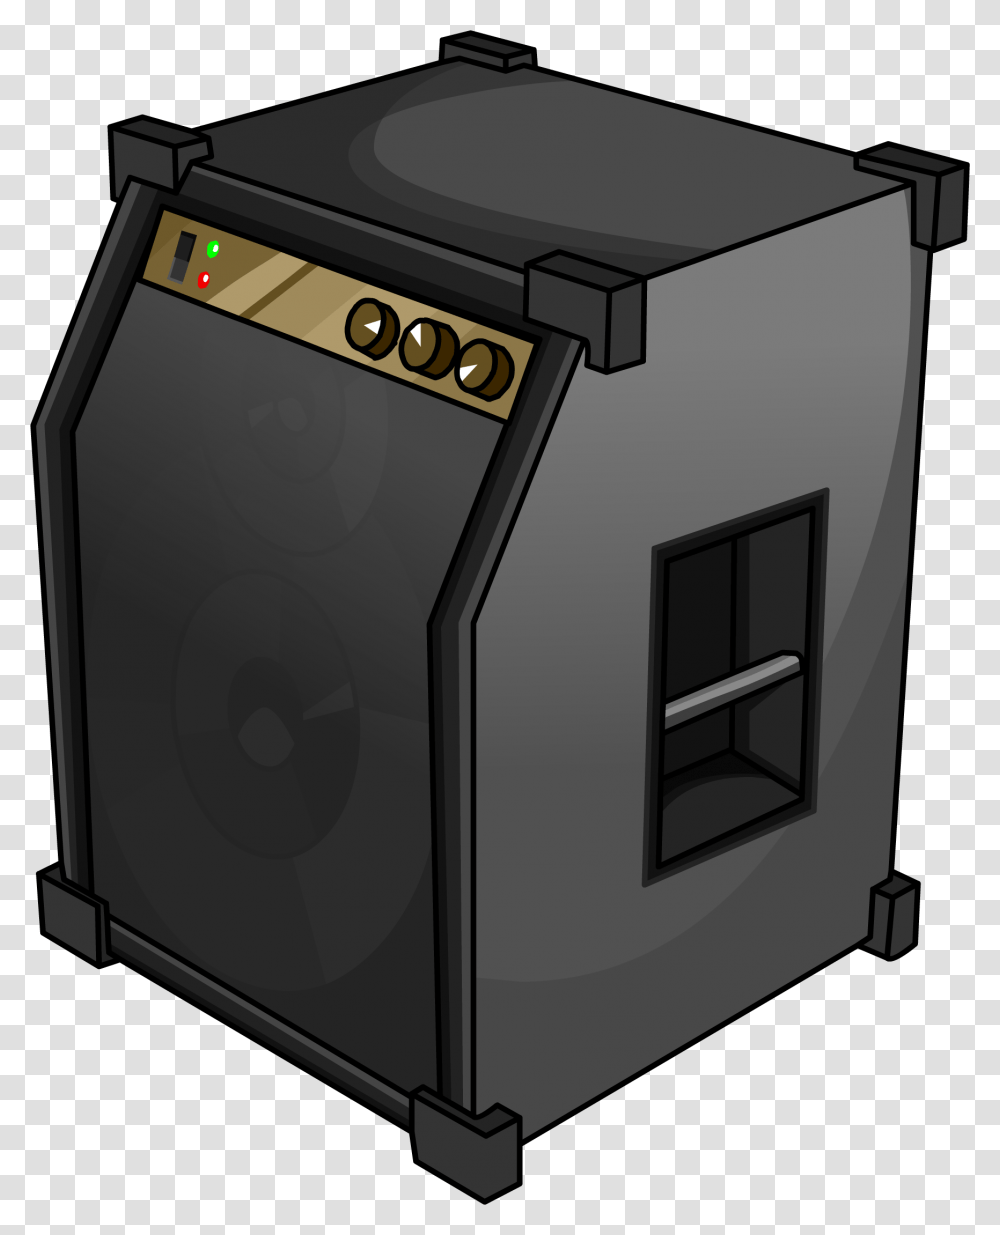 Club Penguin Rewritten Wiki Wood Burning Stove, Mailbox, Letterbox, Dishwasher, Appliance Transparent Png